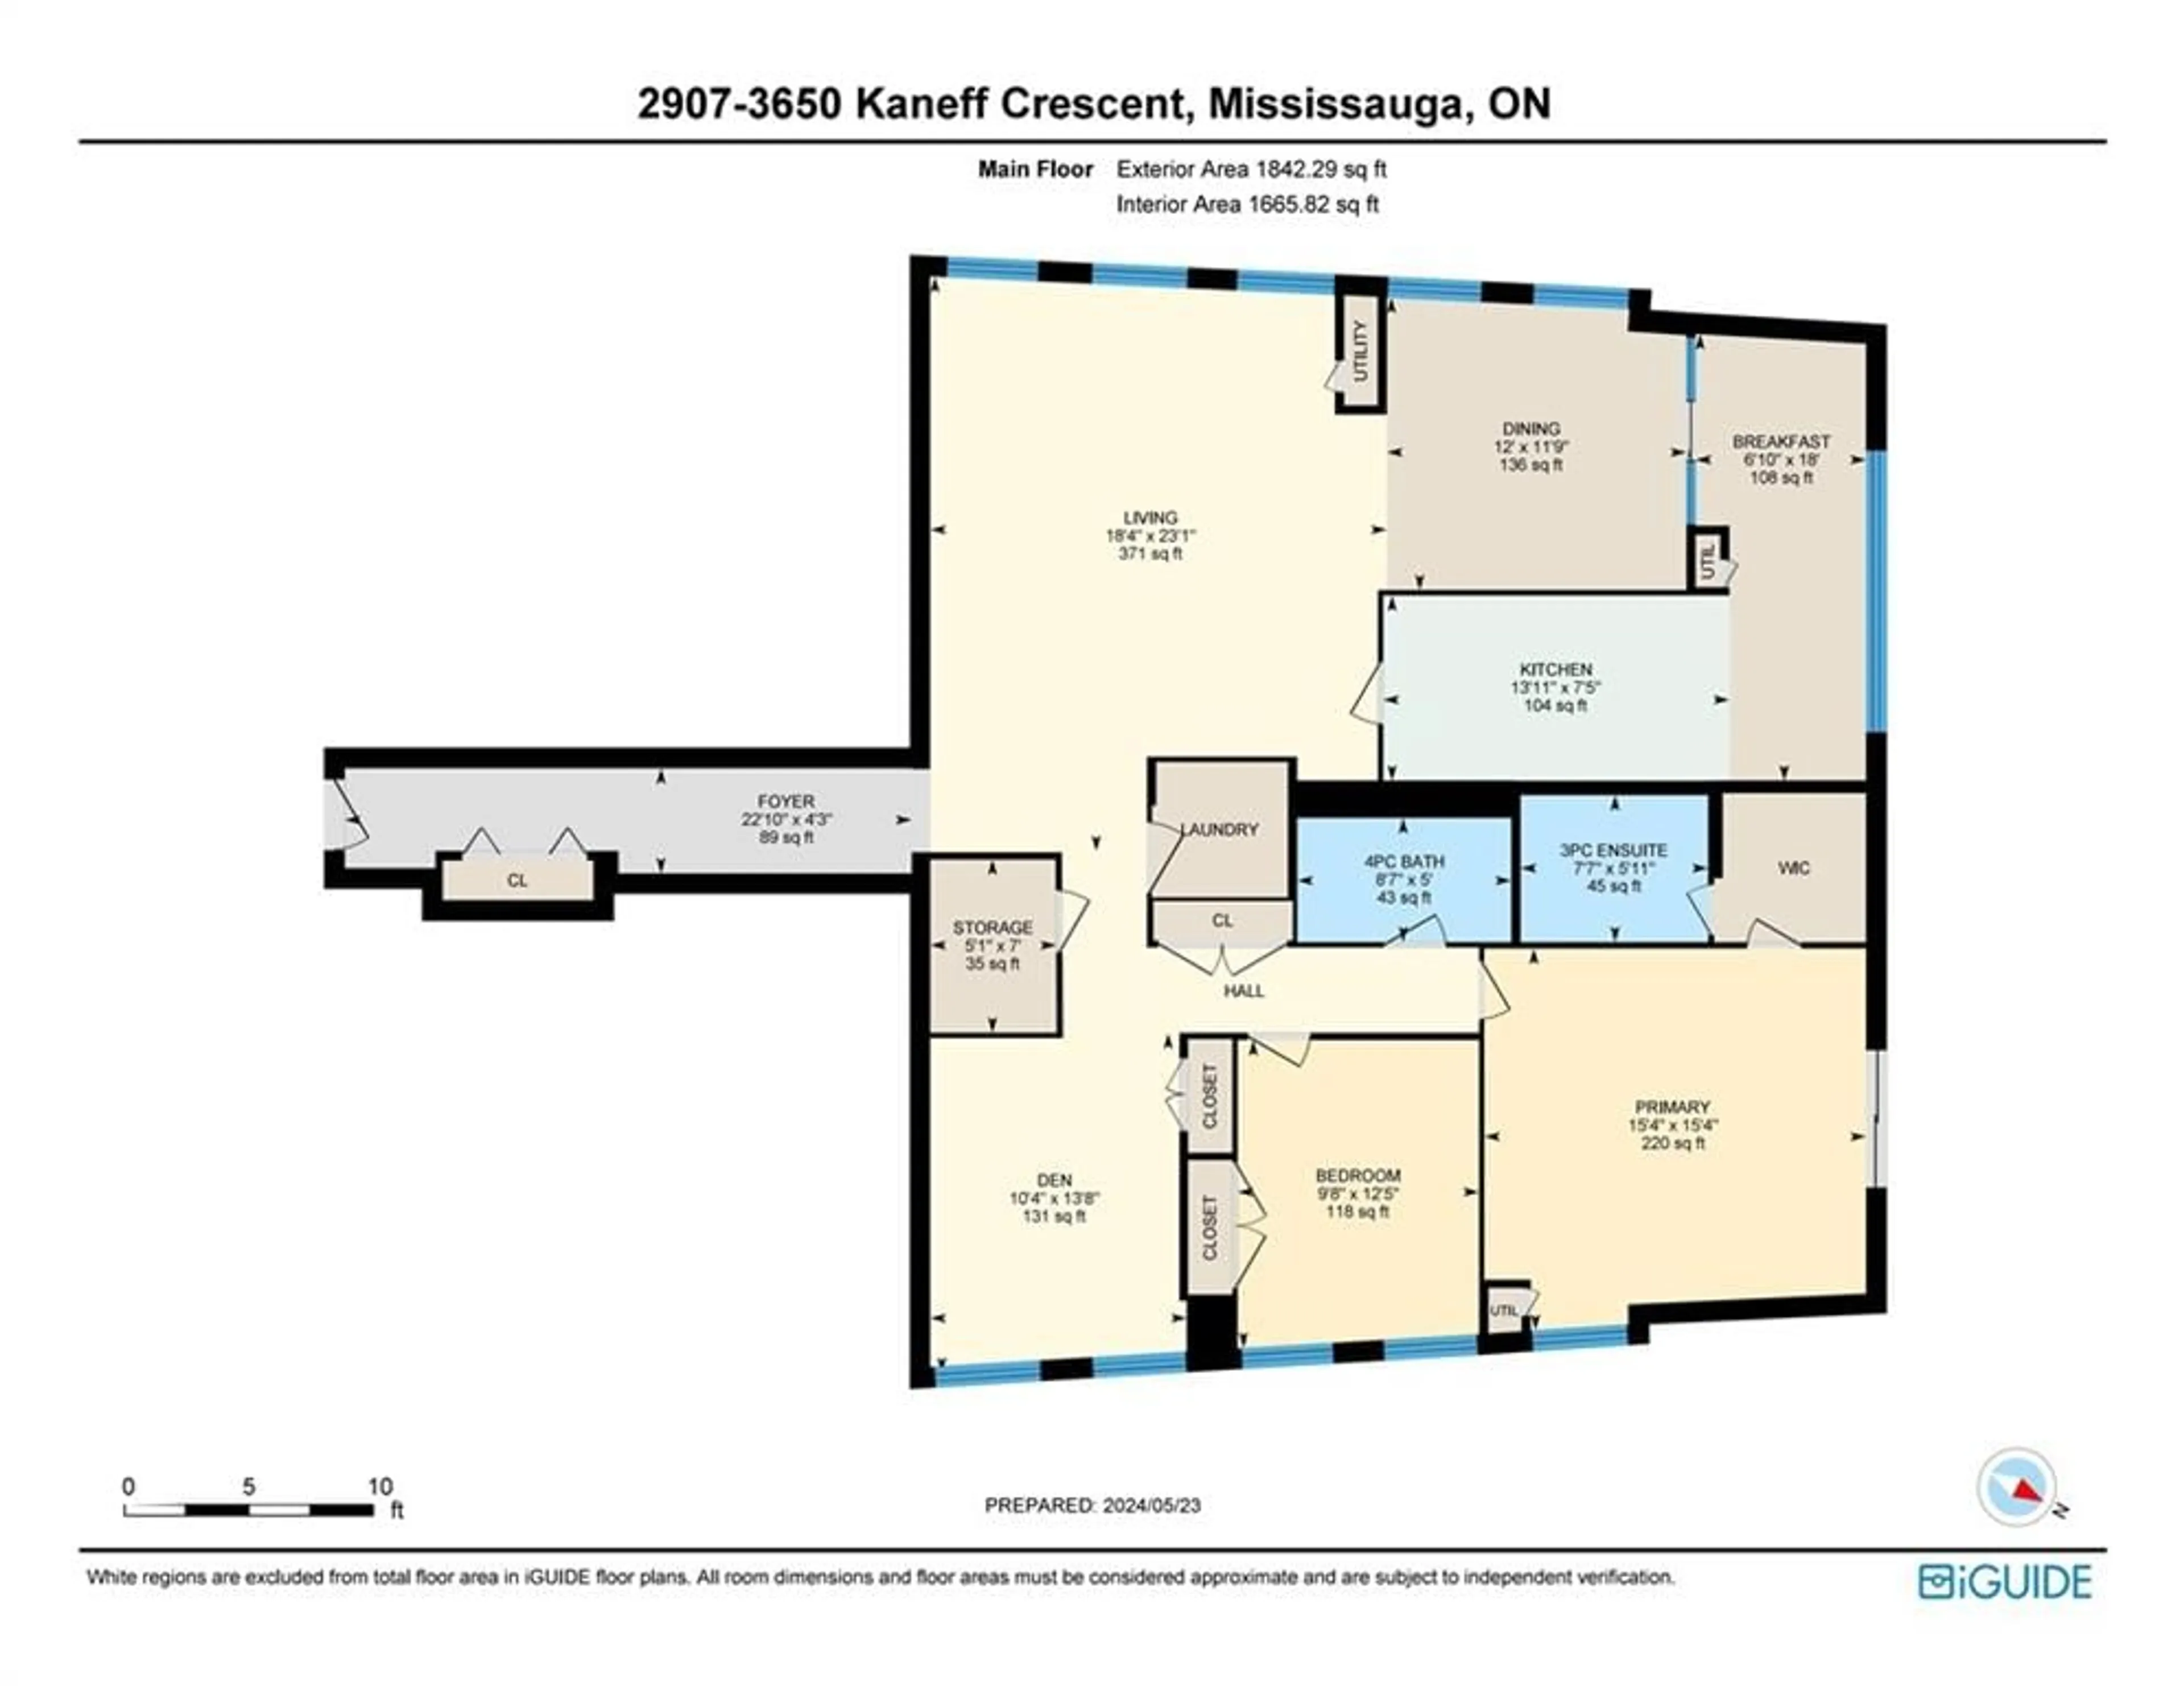 Floor plan for 3650 Kaneff Cres #2907, Mississauga Ontario L5A 4A1